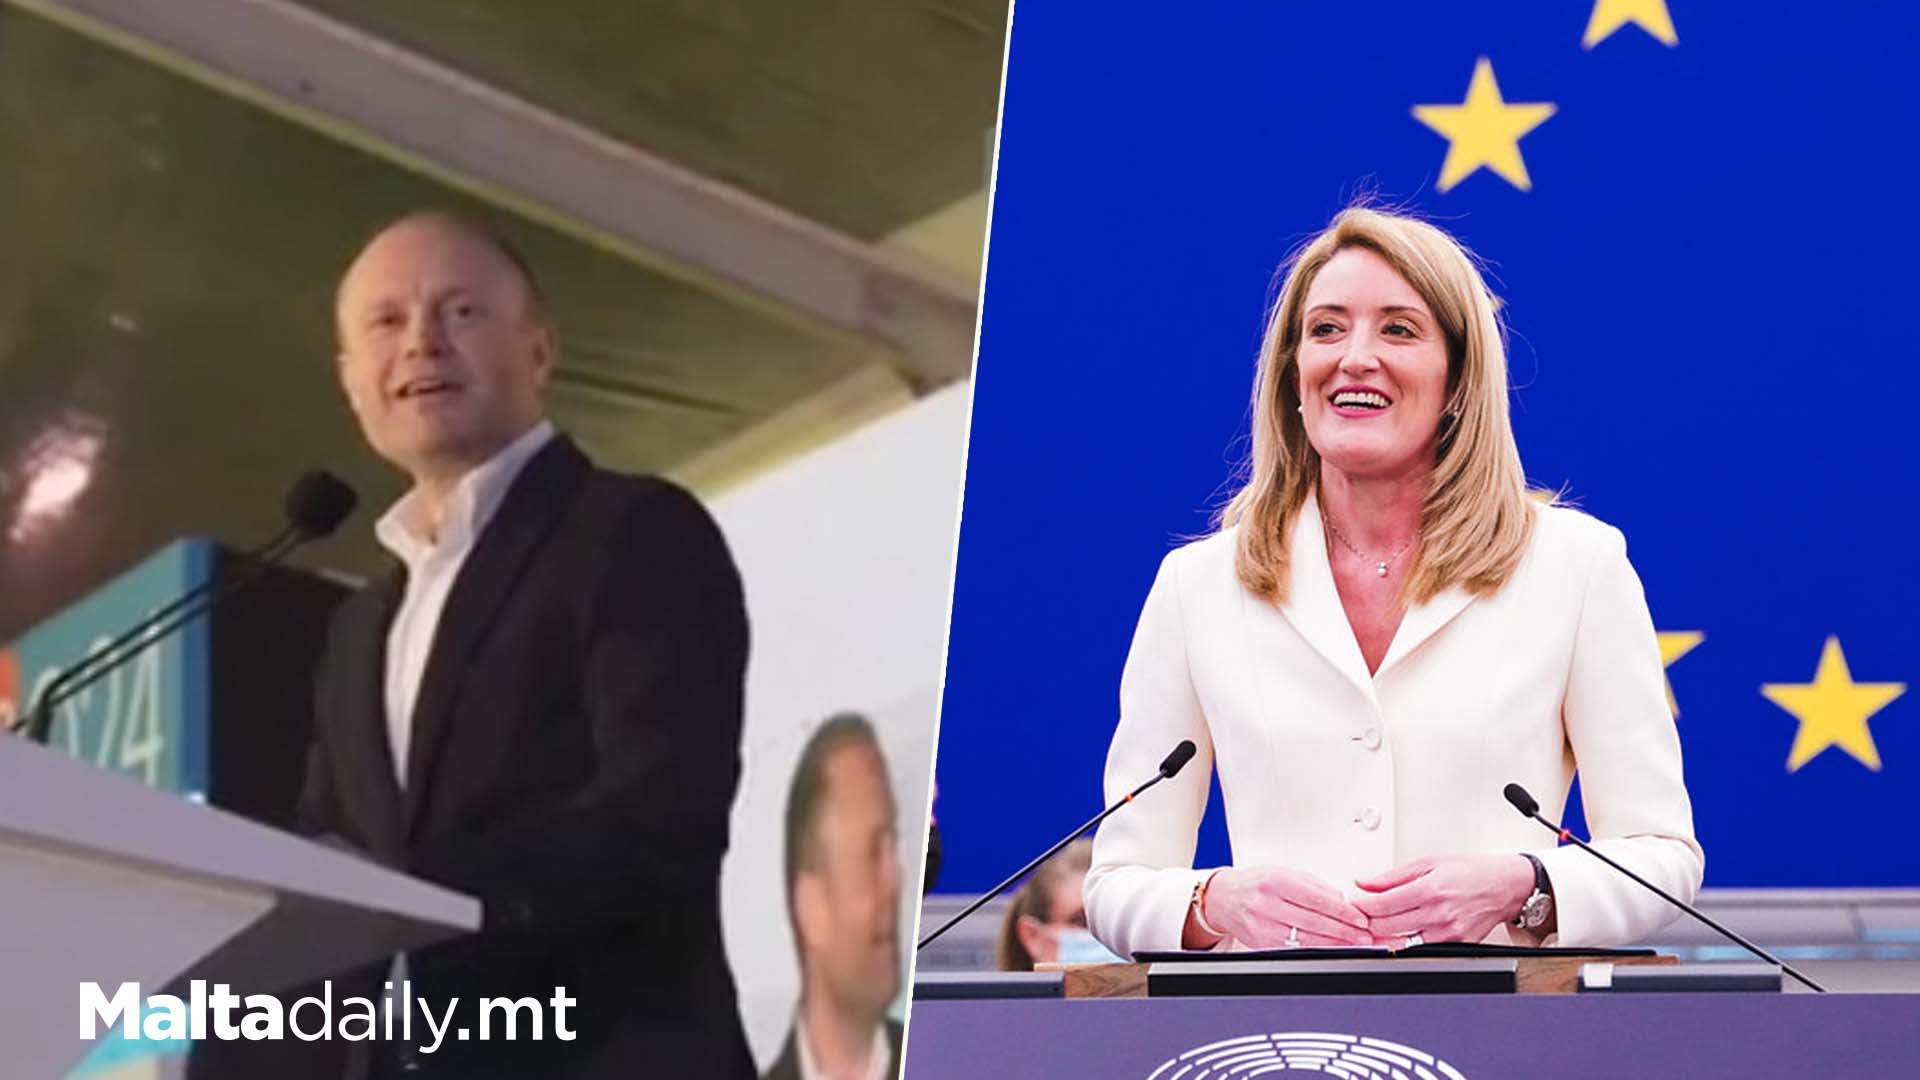 Joseph Muscat Hits Out At EP President Roberta Metsola